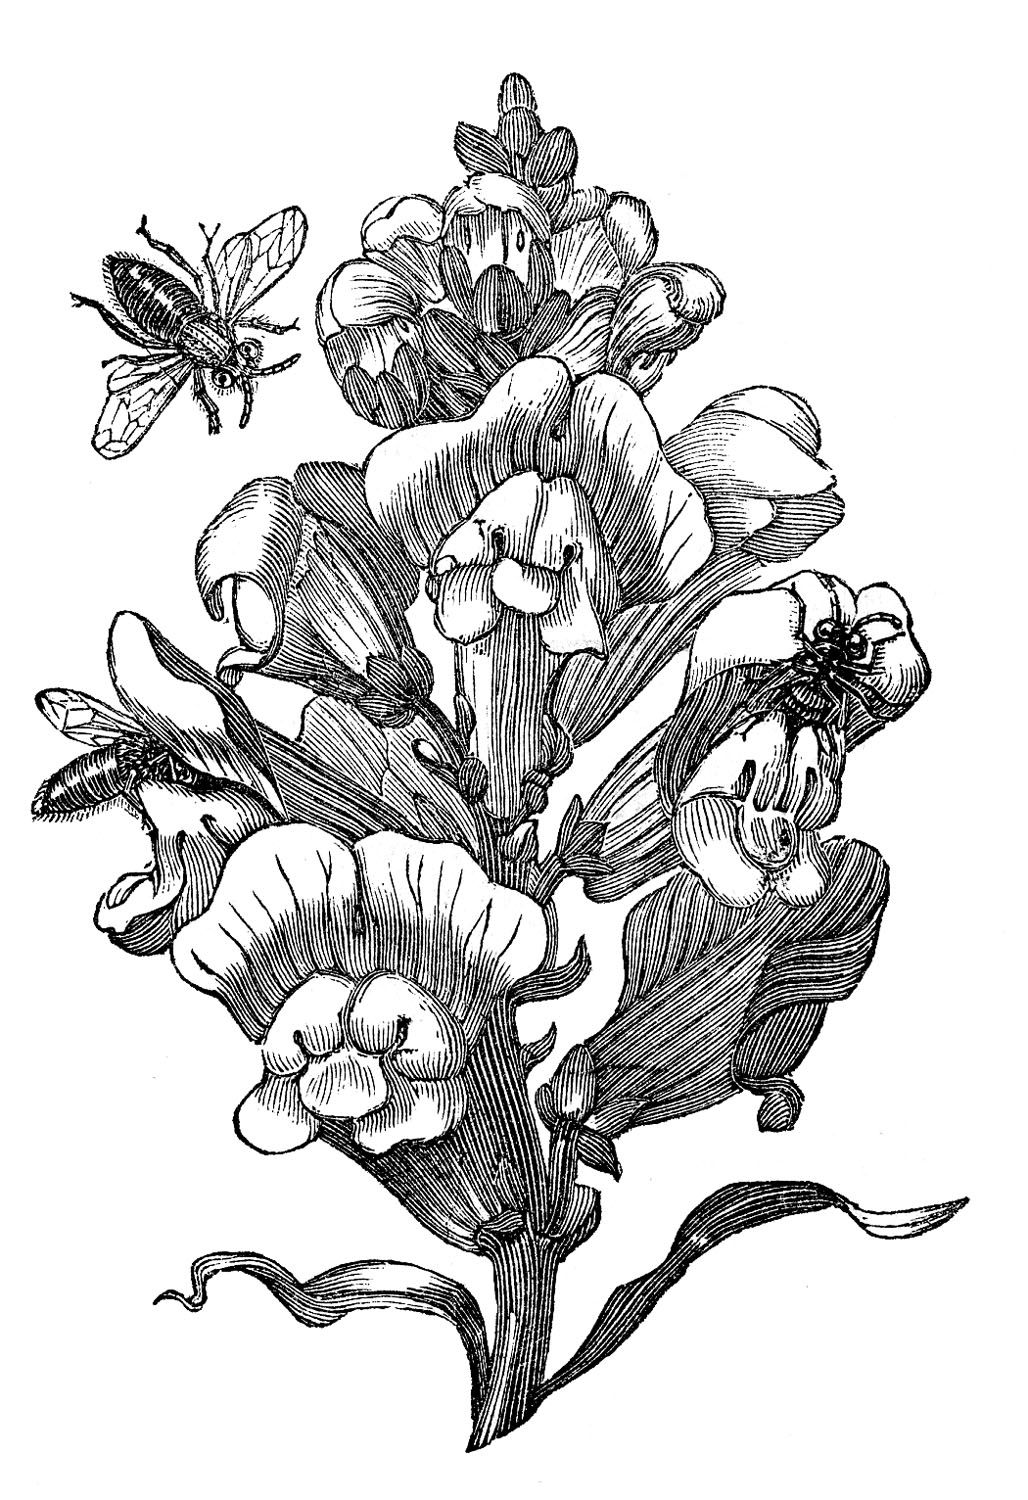 Antique Image - Bees with Snapdragon - Botanical - The Graphics Fairy